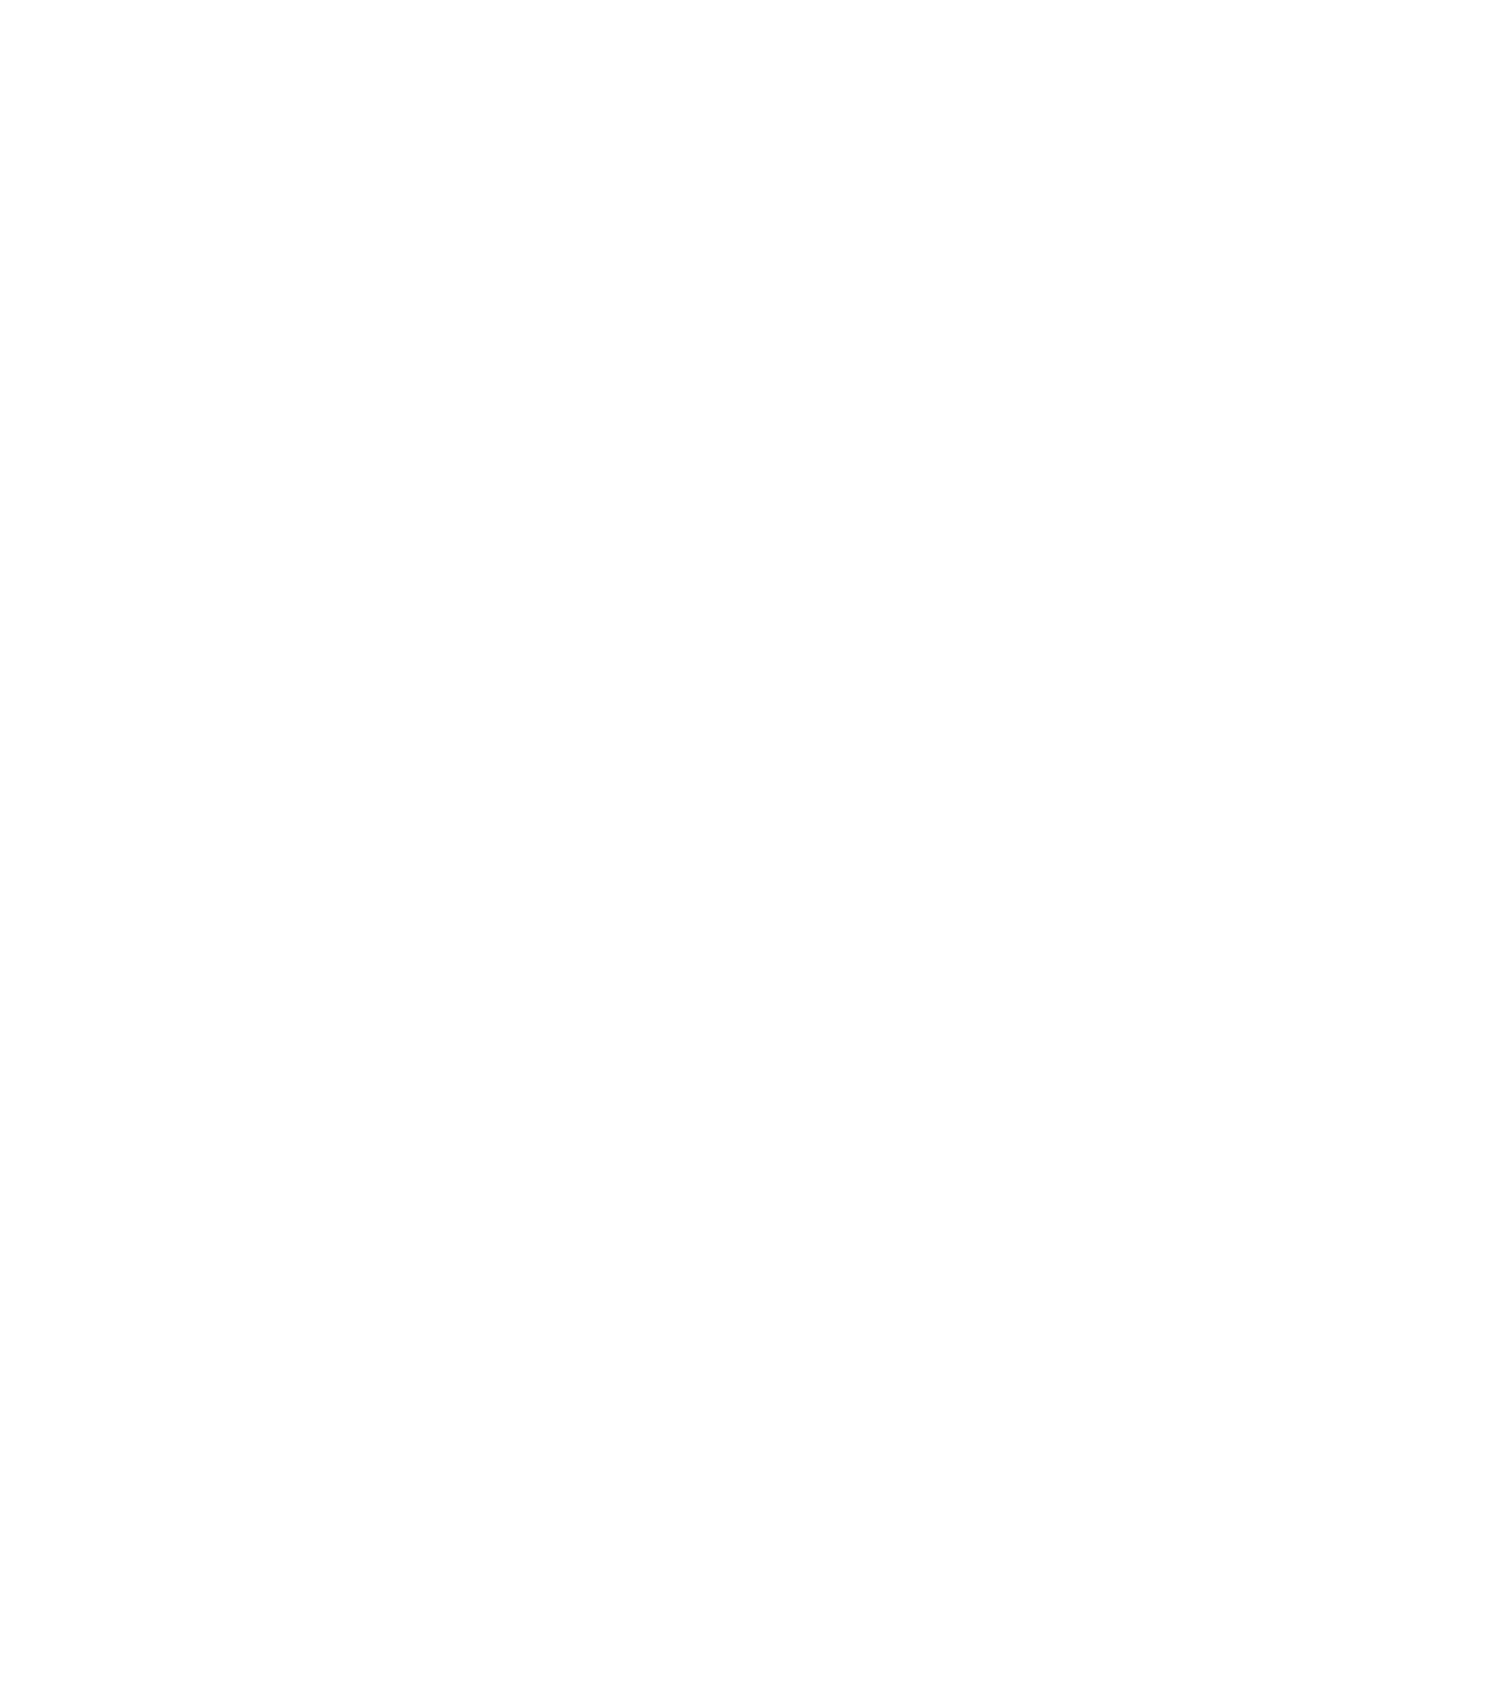 redwater events logo